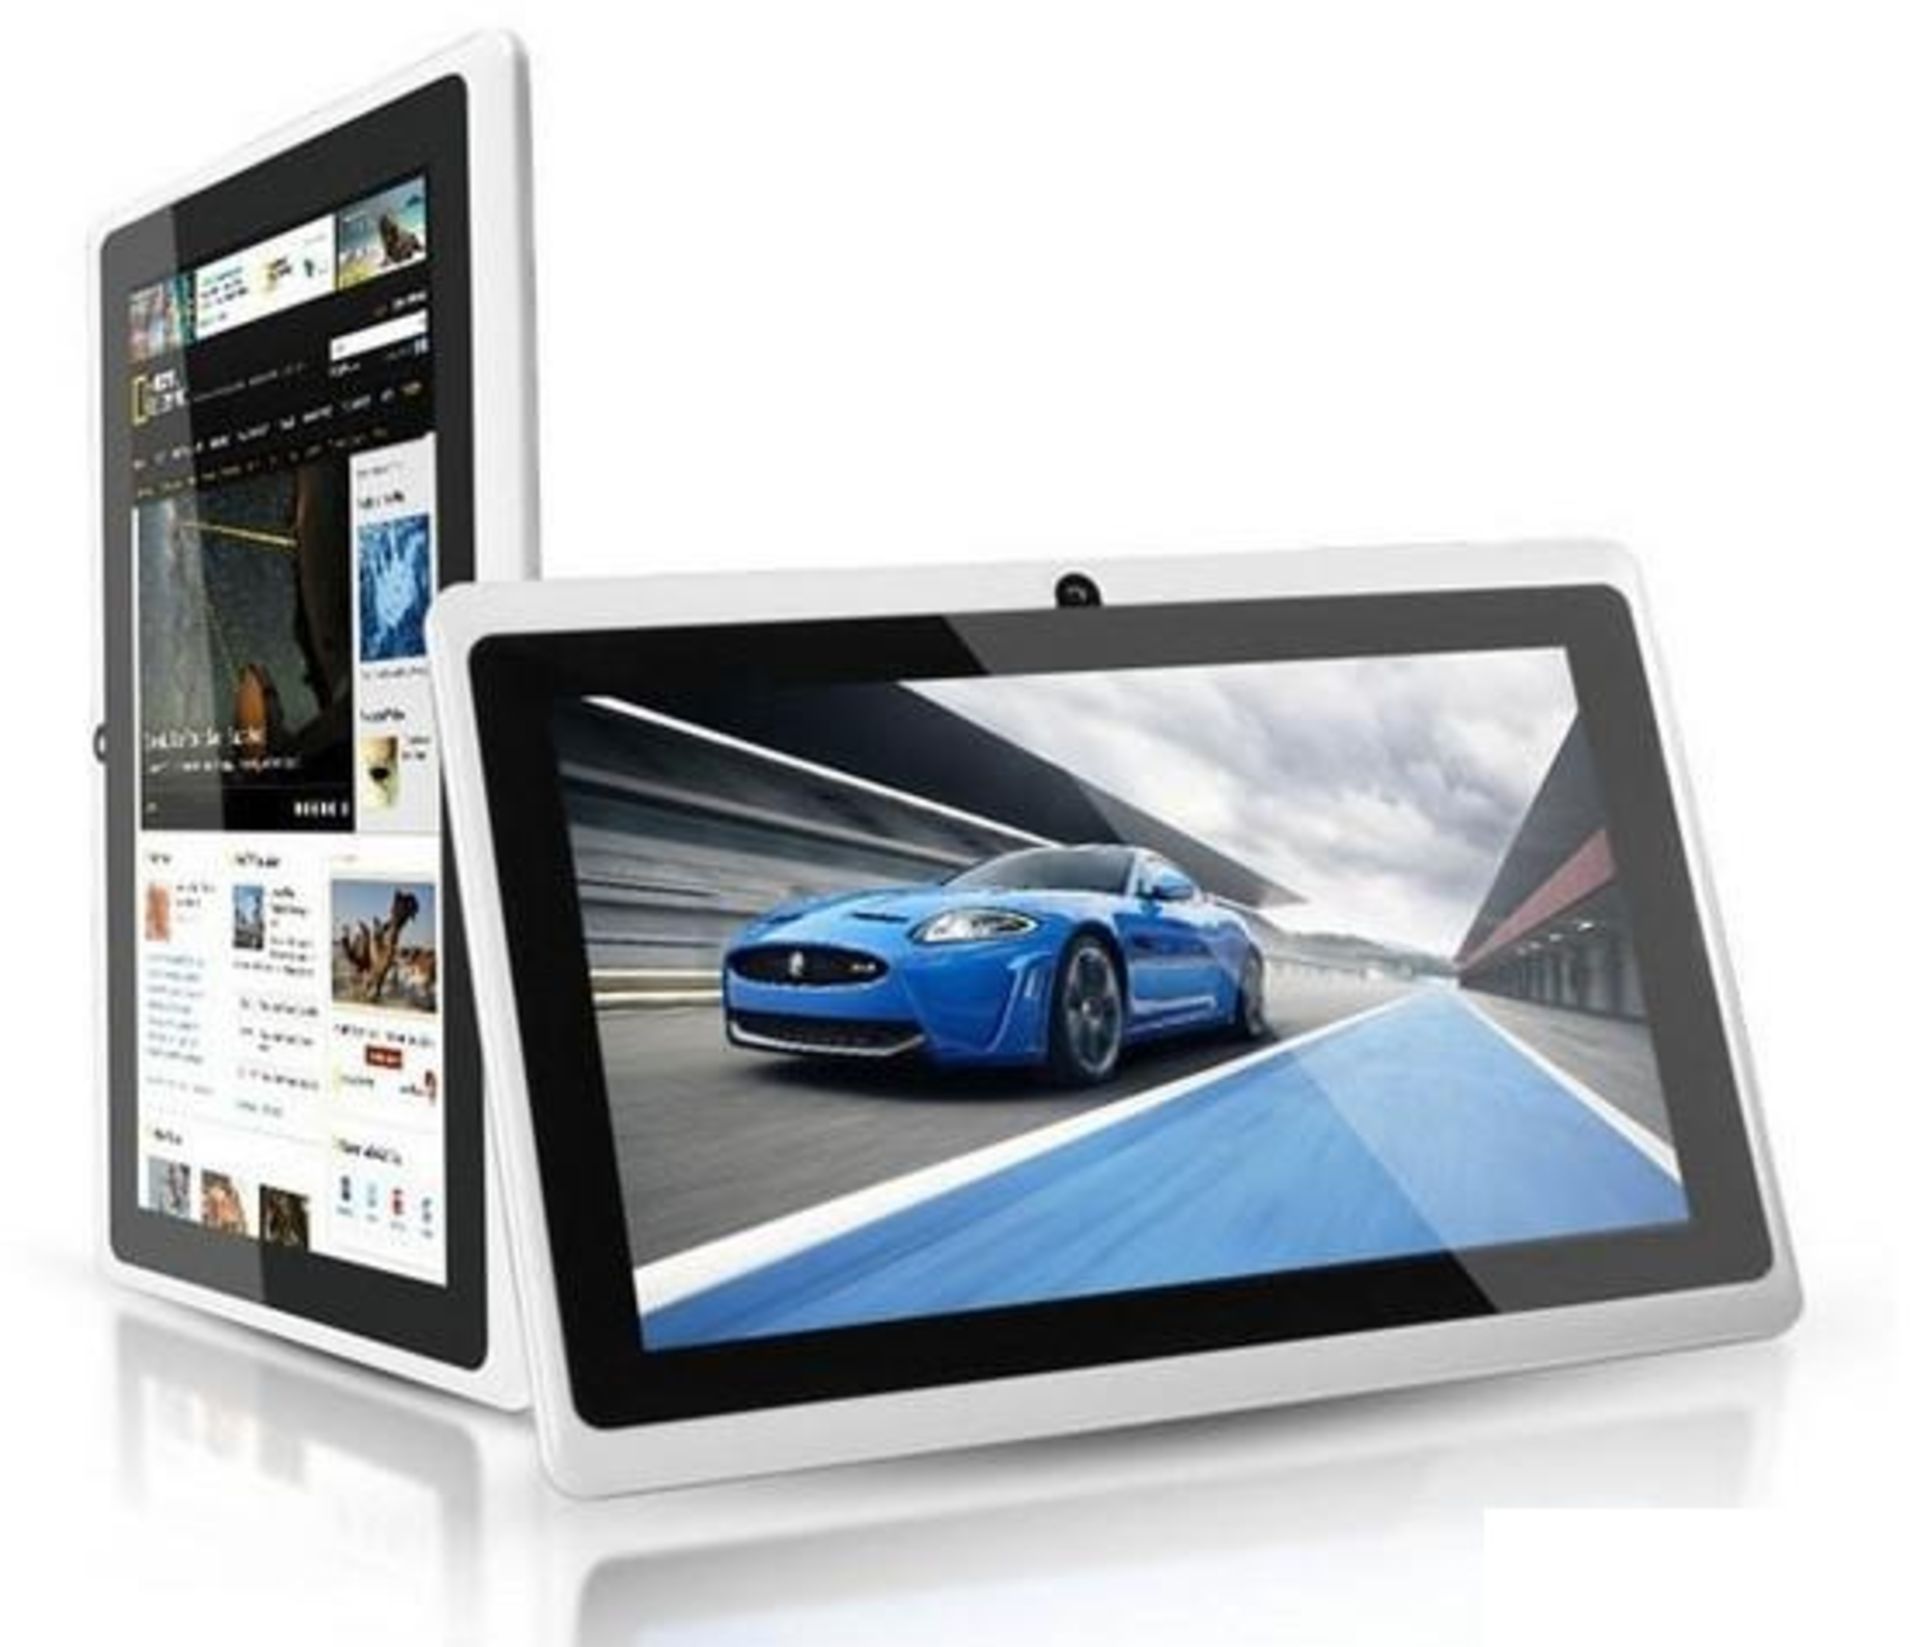 Brand New 7" Android 4.2 Tablet Dual Core - WiFi - Bluetooth - Front And Rear Cameras - Comes With